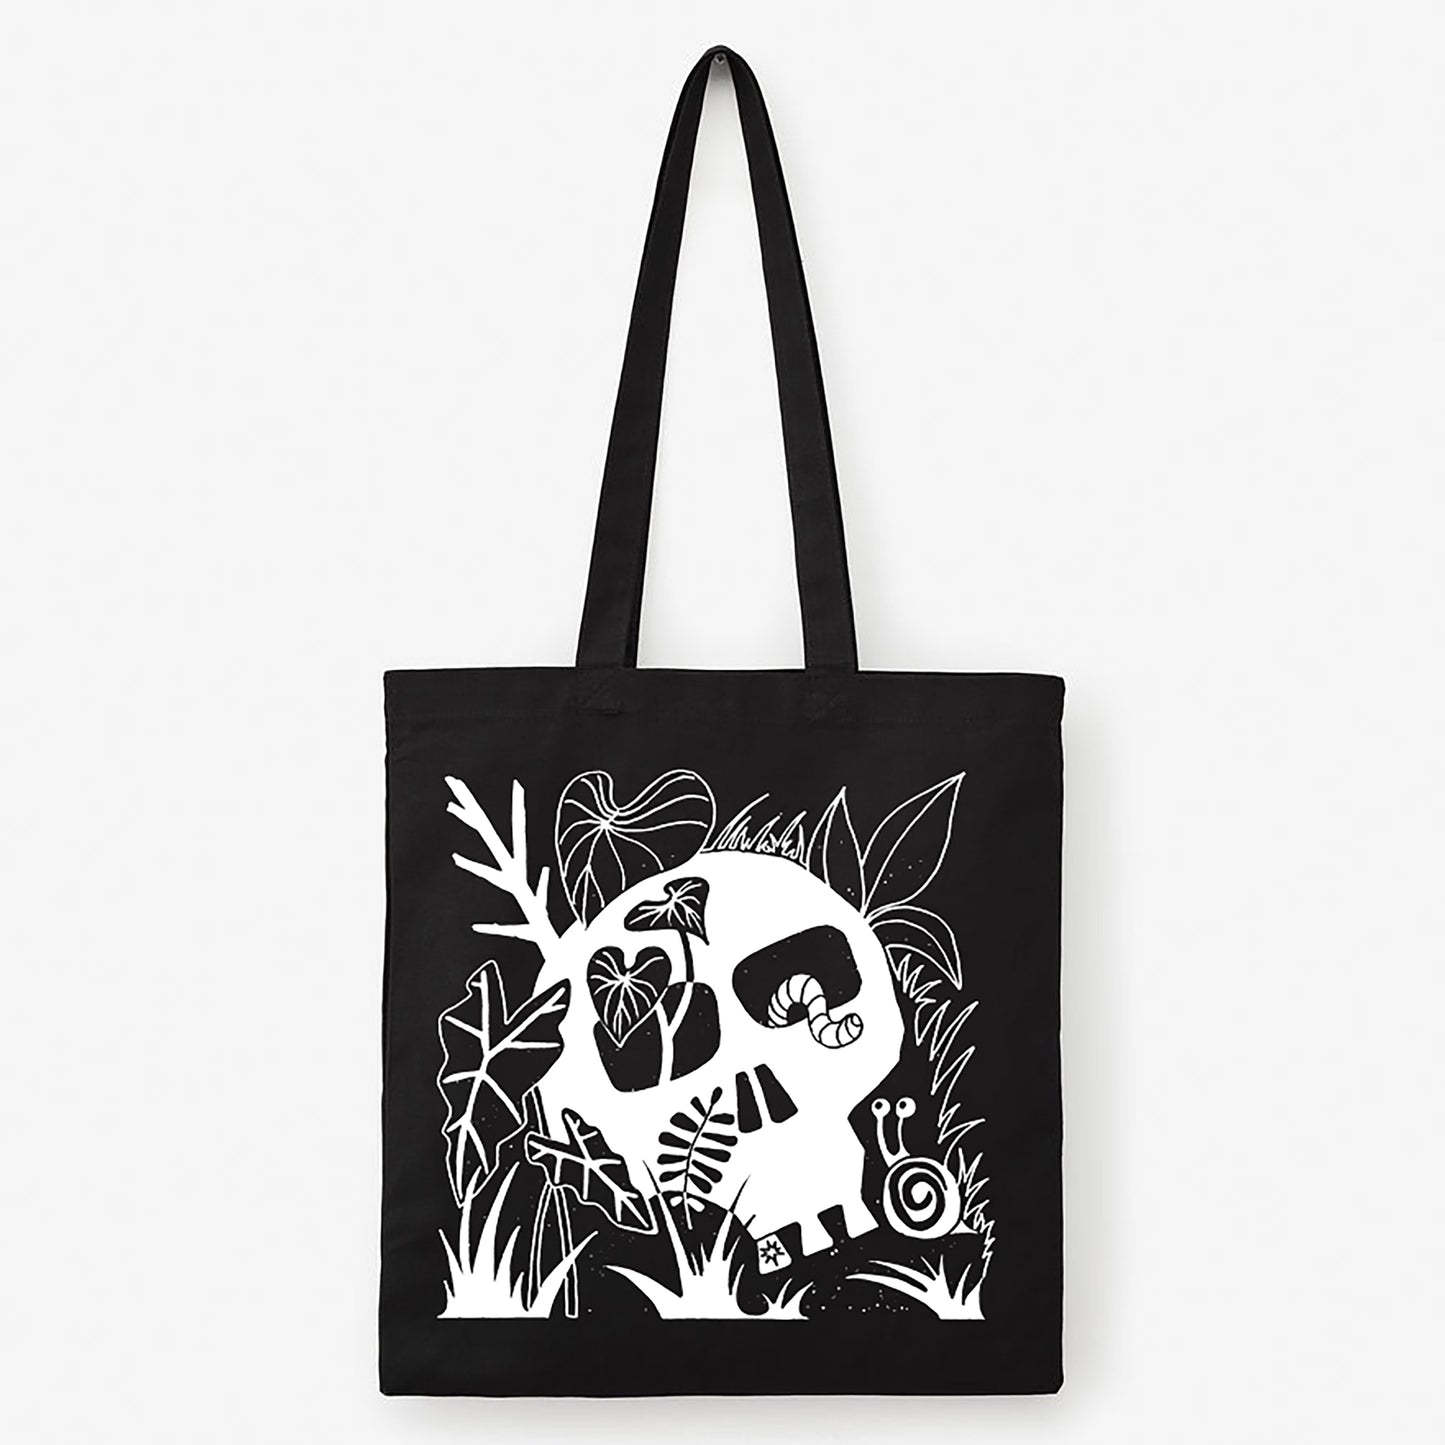 Life and Death Tote Bag